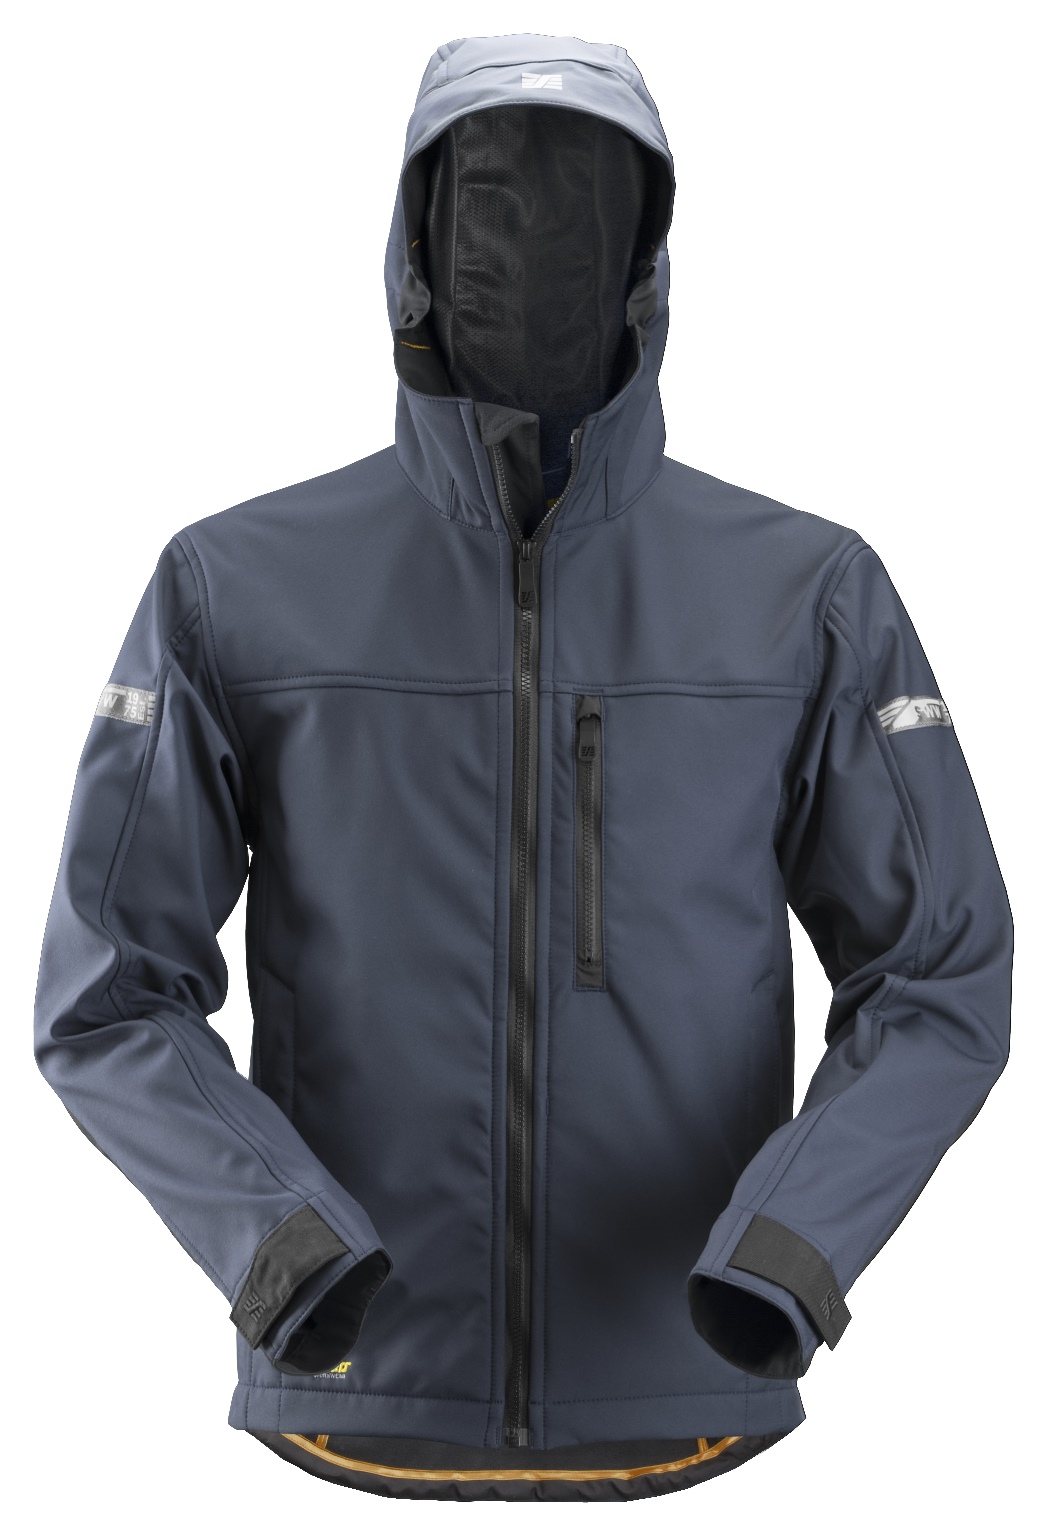 Snickers Allroundwork 1229 - softshell à capuche